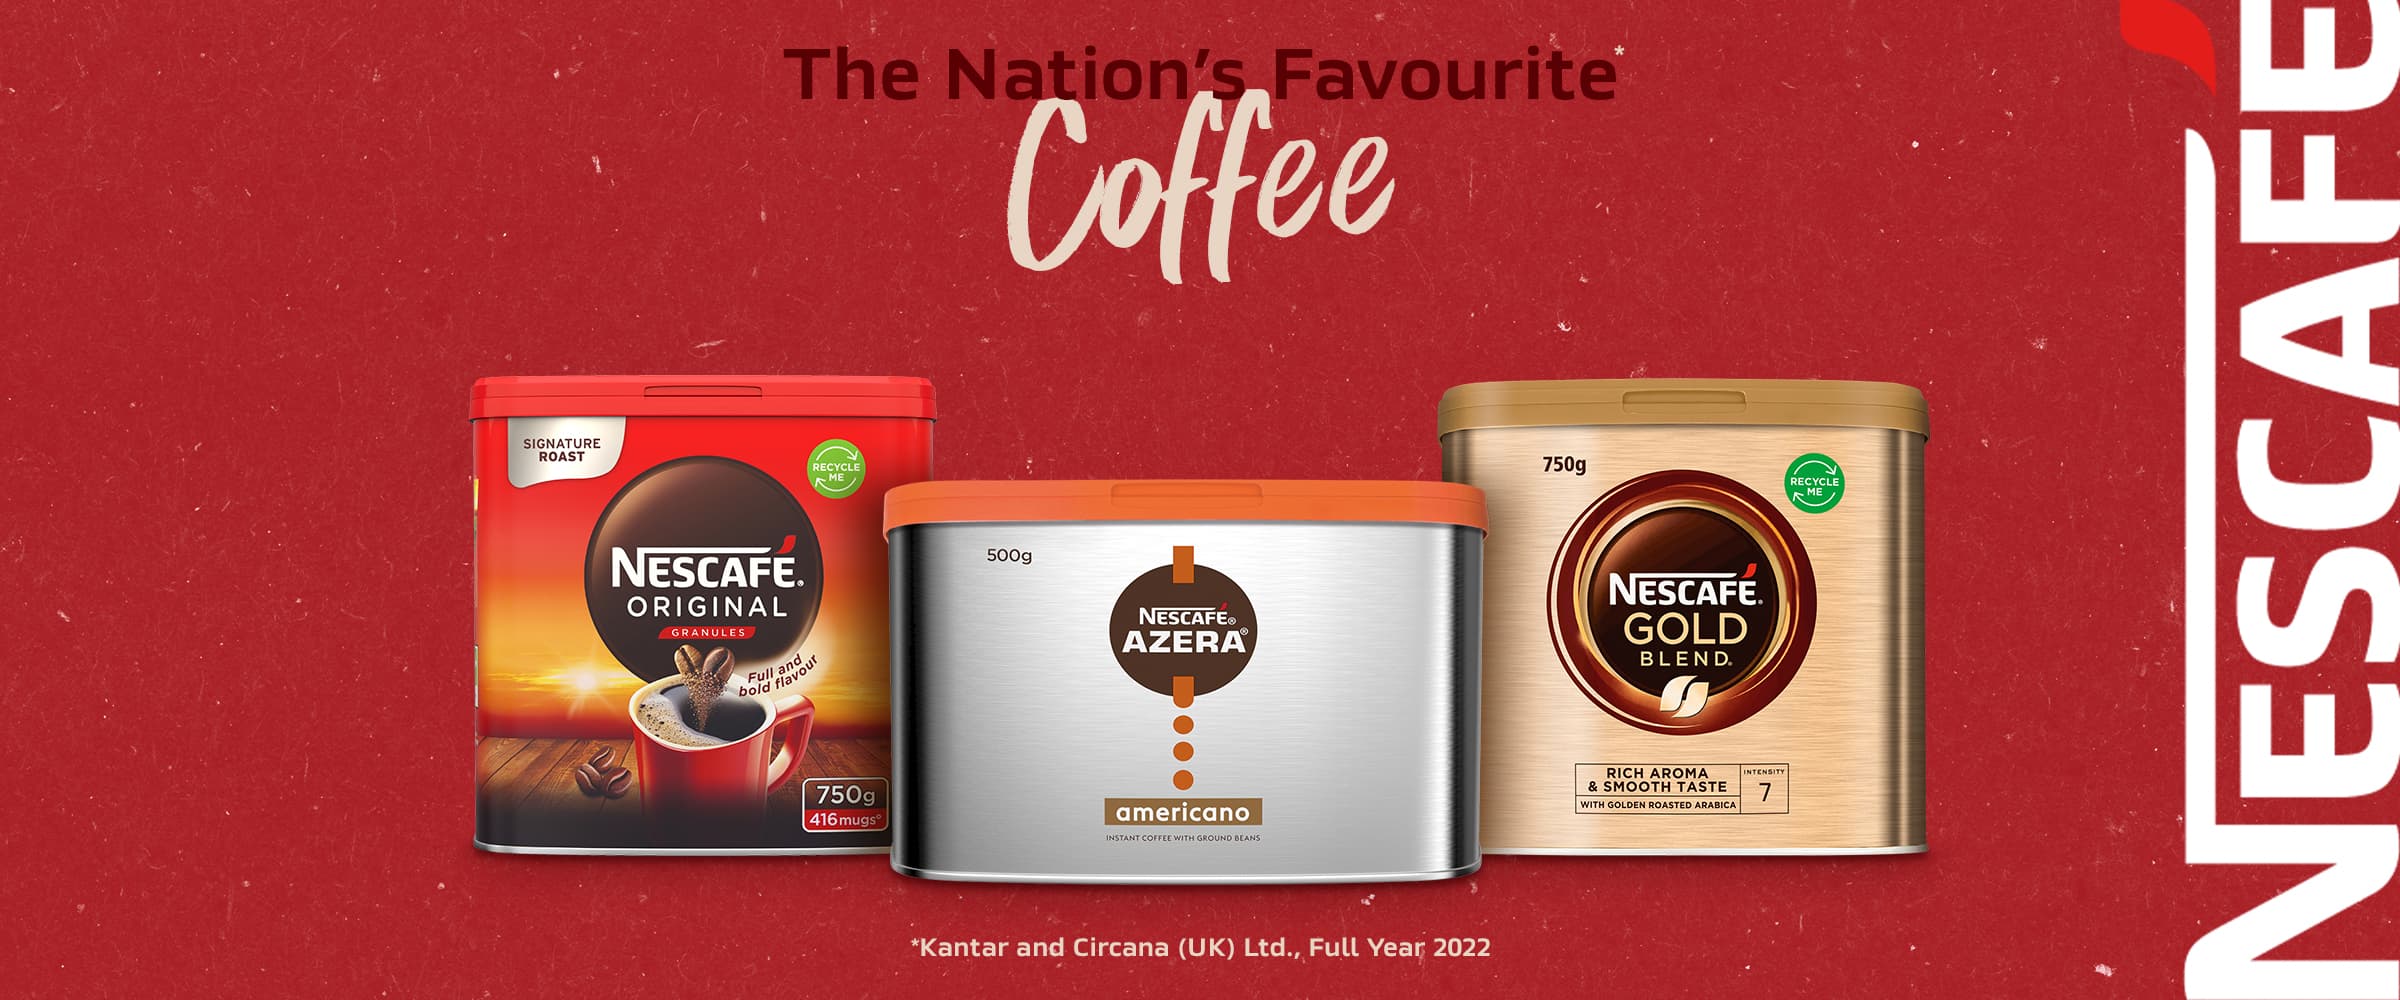 The Nation's favourite Coffee